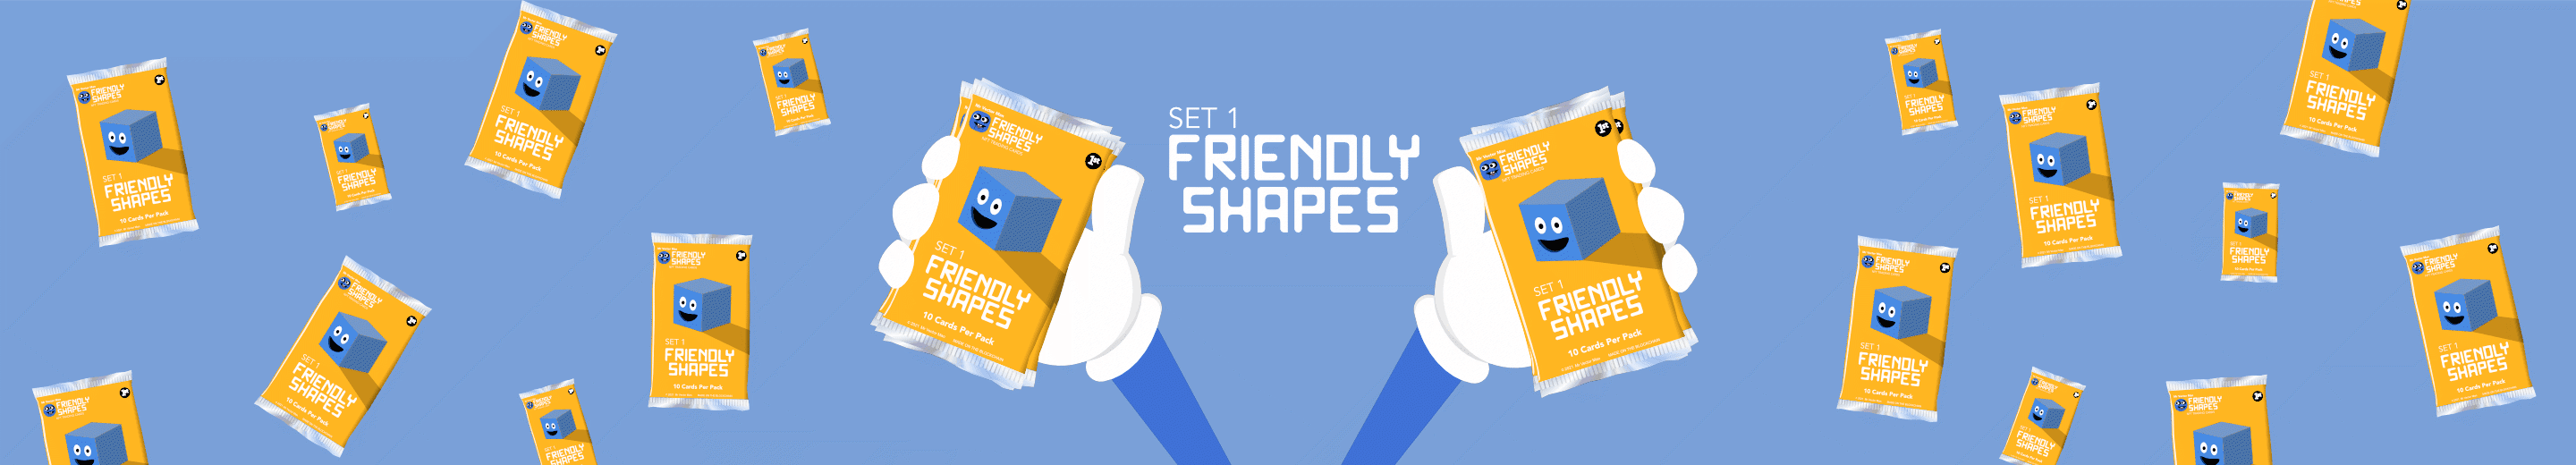 Friendly Shapes Cards